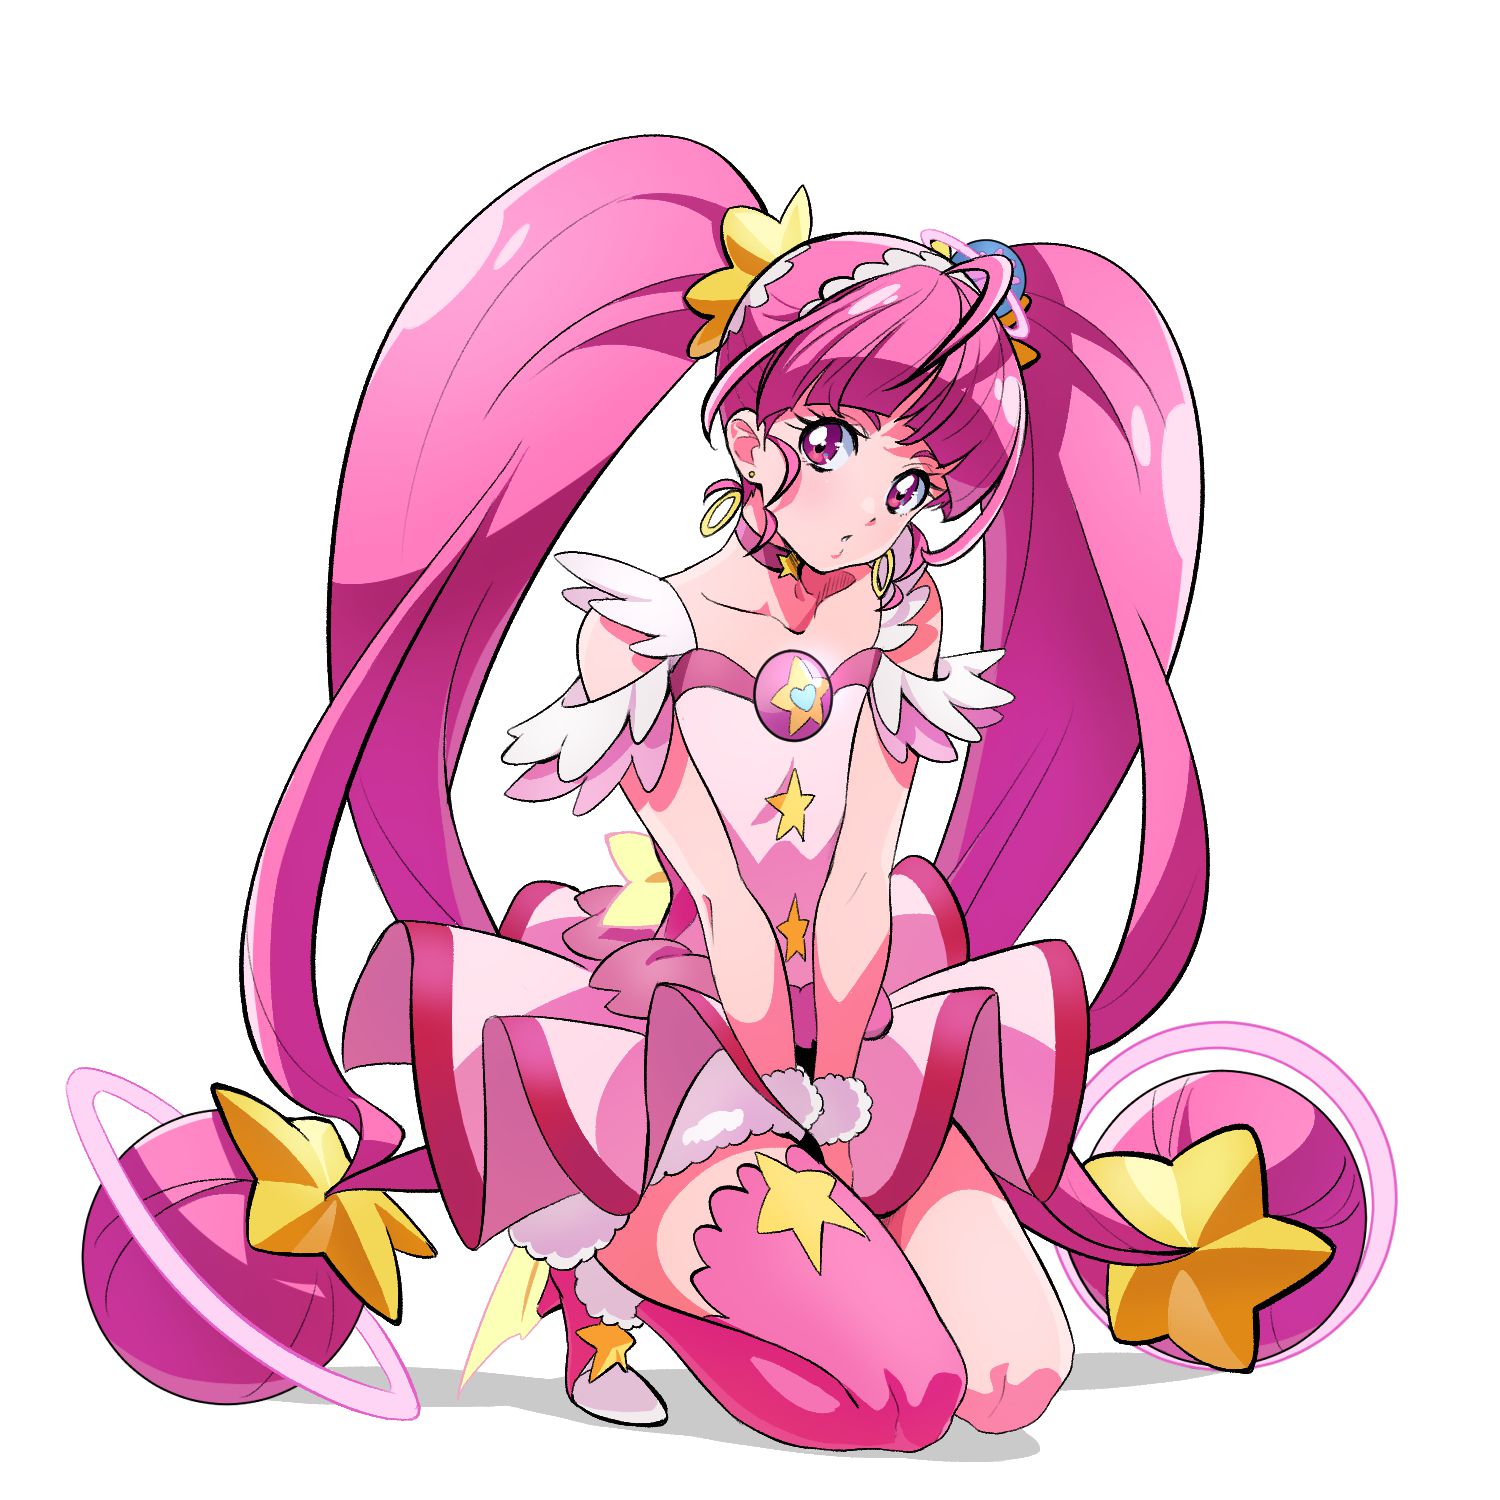 [Star Twinkle Pretty Cure] Stapuri's Image Erotic Image Part 13 39